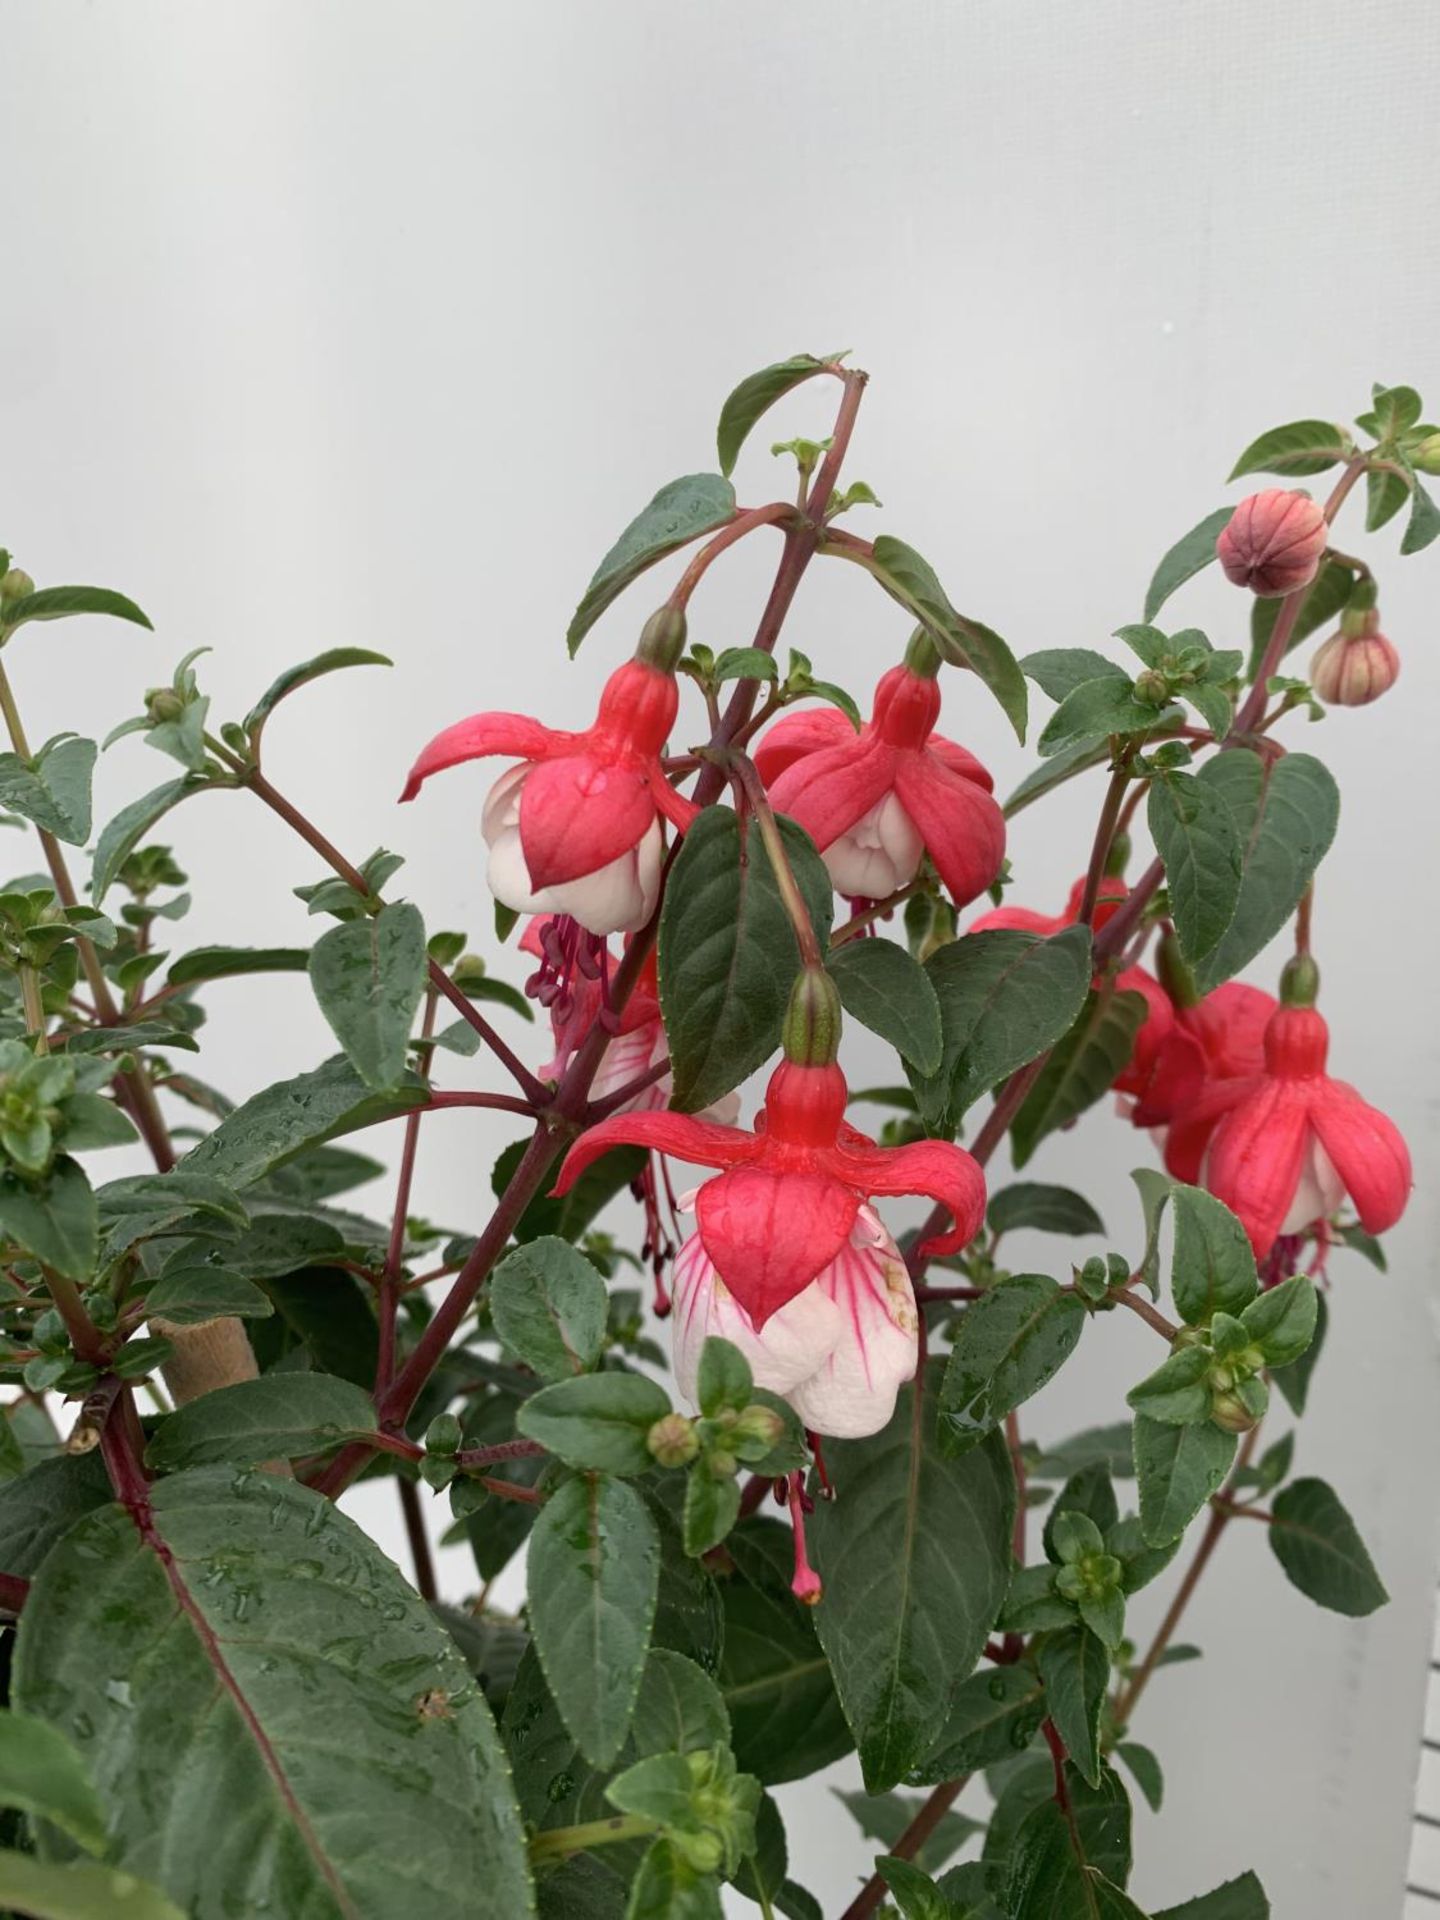 TWO BELLA STANDARD FUCHSIA IN A 3 LTR POTS 70CM -80CM TALL TO BE SOLD FOR THE TWO PLUS VAT - Image 2 of 5